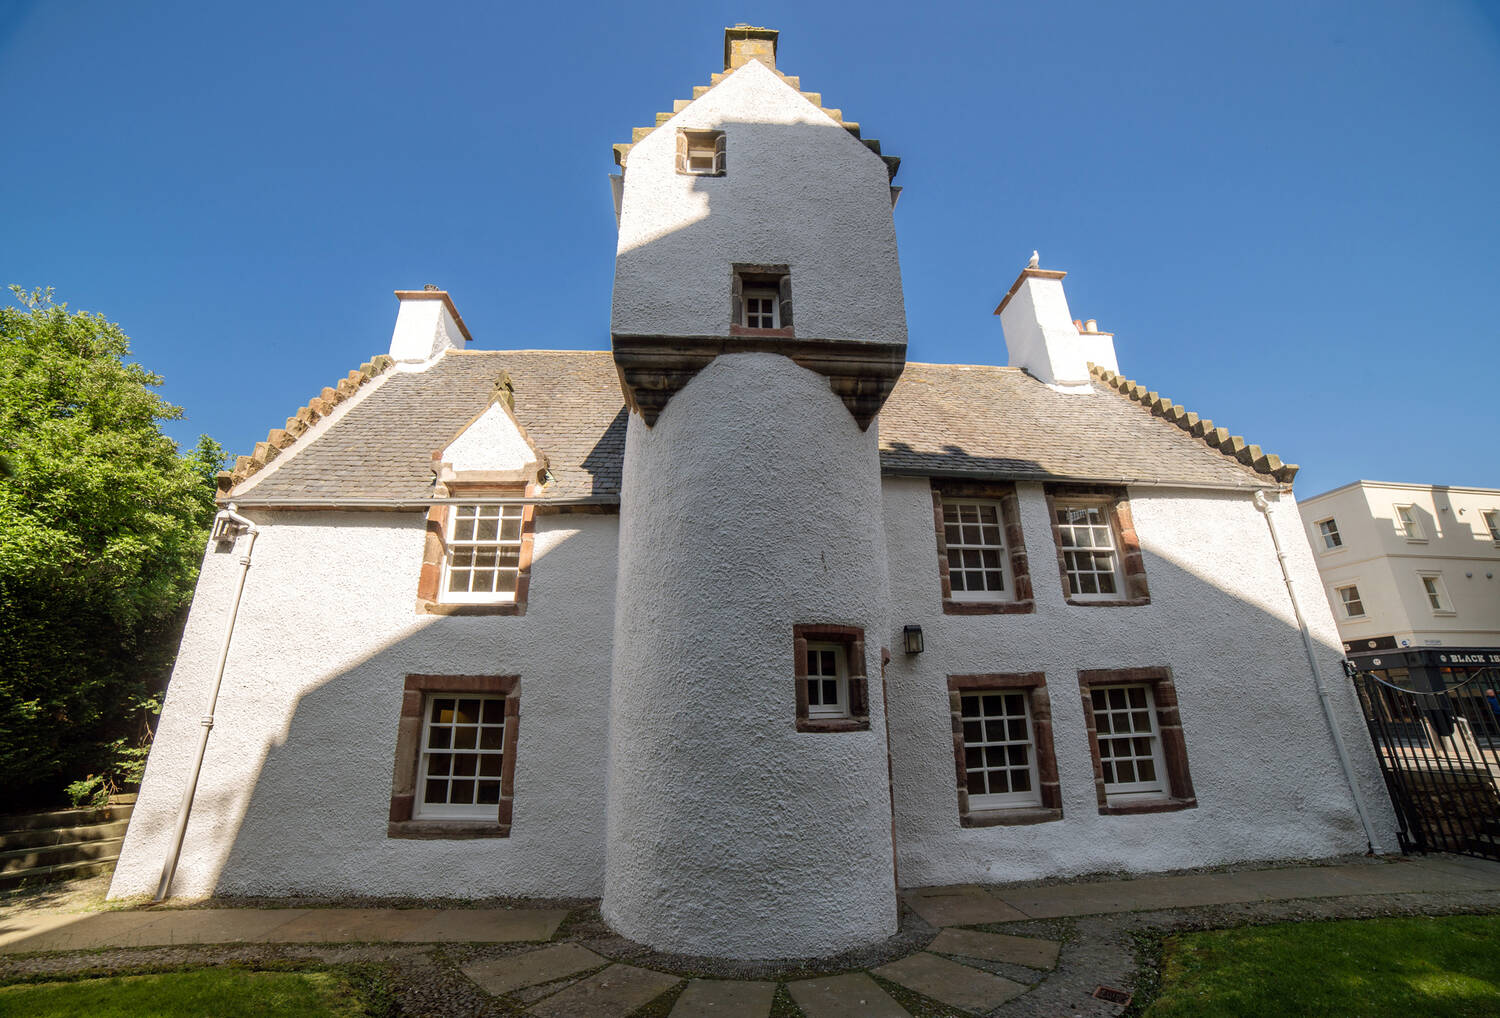 An exterior view of Abertarff House, where its bright white stone walls contrast against a deep blue sky. It has a round tower with a turreted top in the centre of the building.